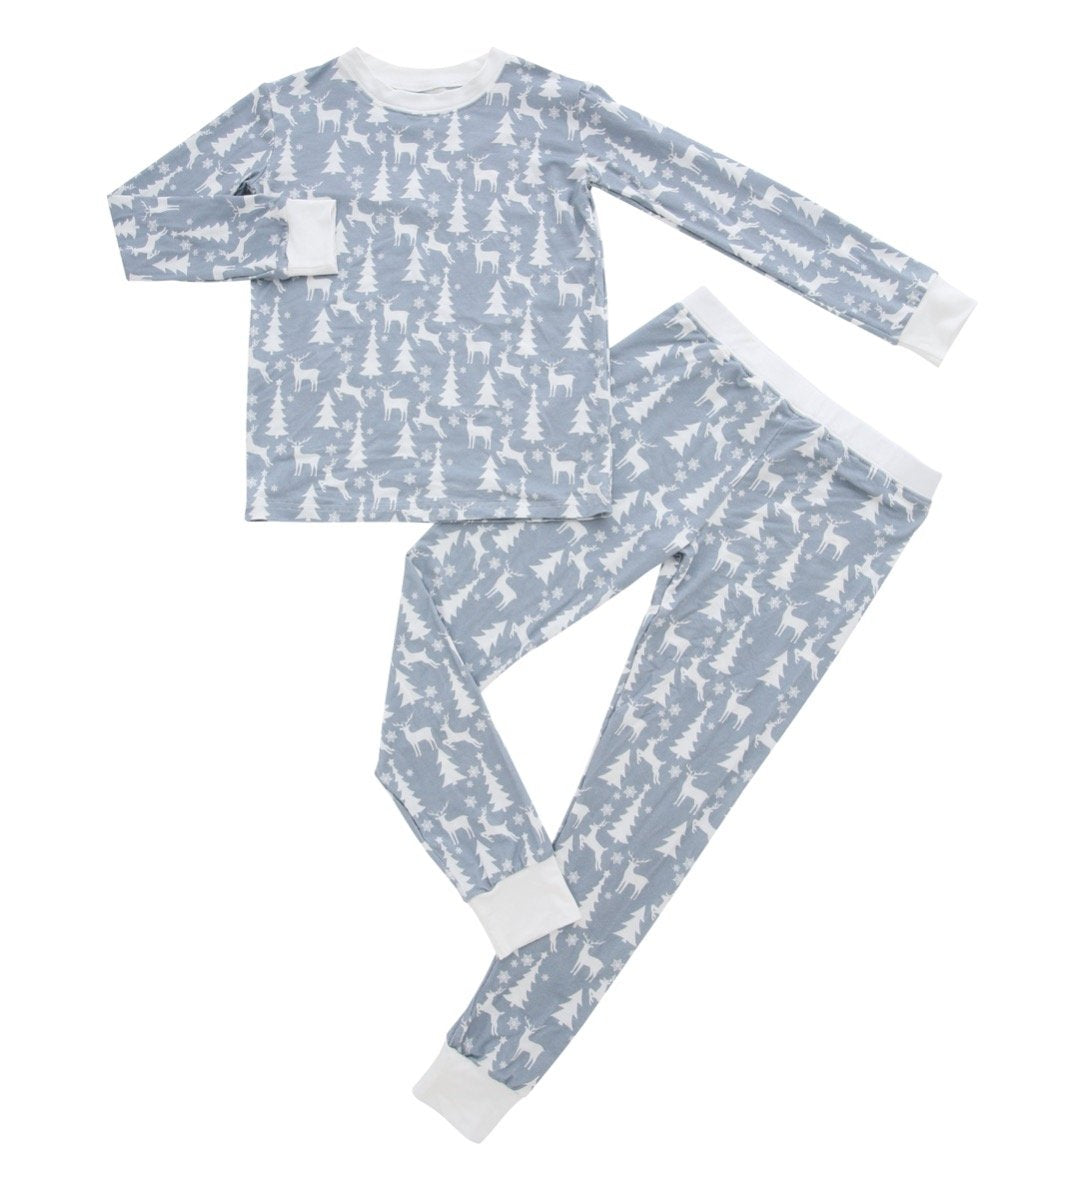 Youth White Christmas Bamboo Toddler Pajama Set - FINAL SALE KIDS - Baby - Unisex Baby Clothing EMERSON AND FRIENDS   